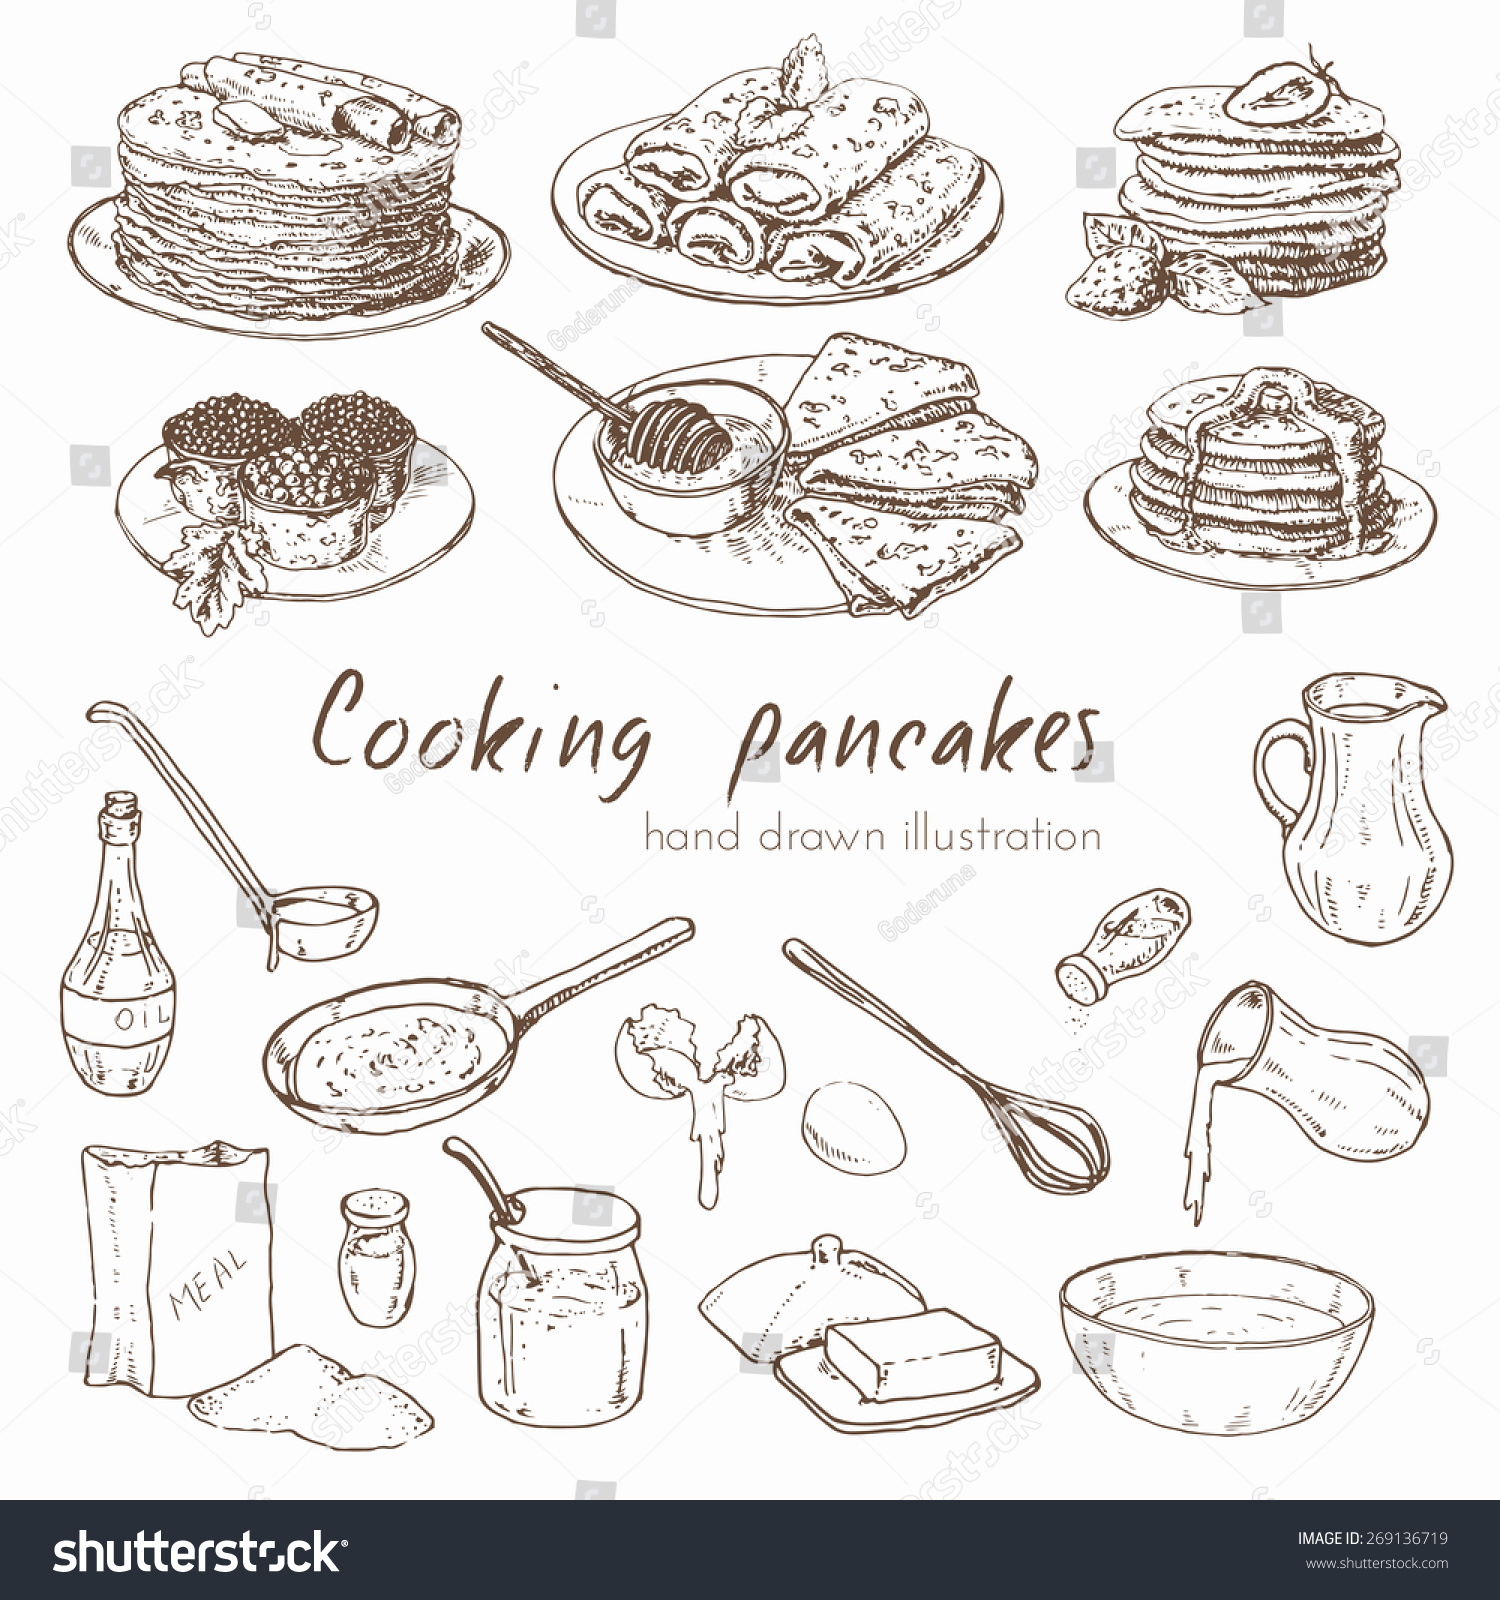 SVG of Illustration depicting the process of cooking pancakes and various types of pancakes. infographic about the recipe for pancakes. Vector hand drawn set.  svg